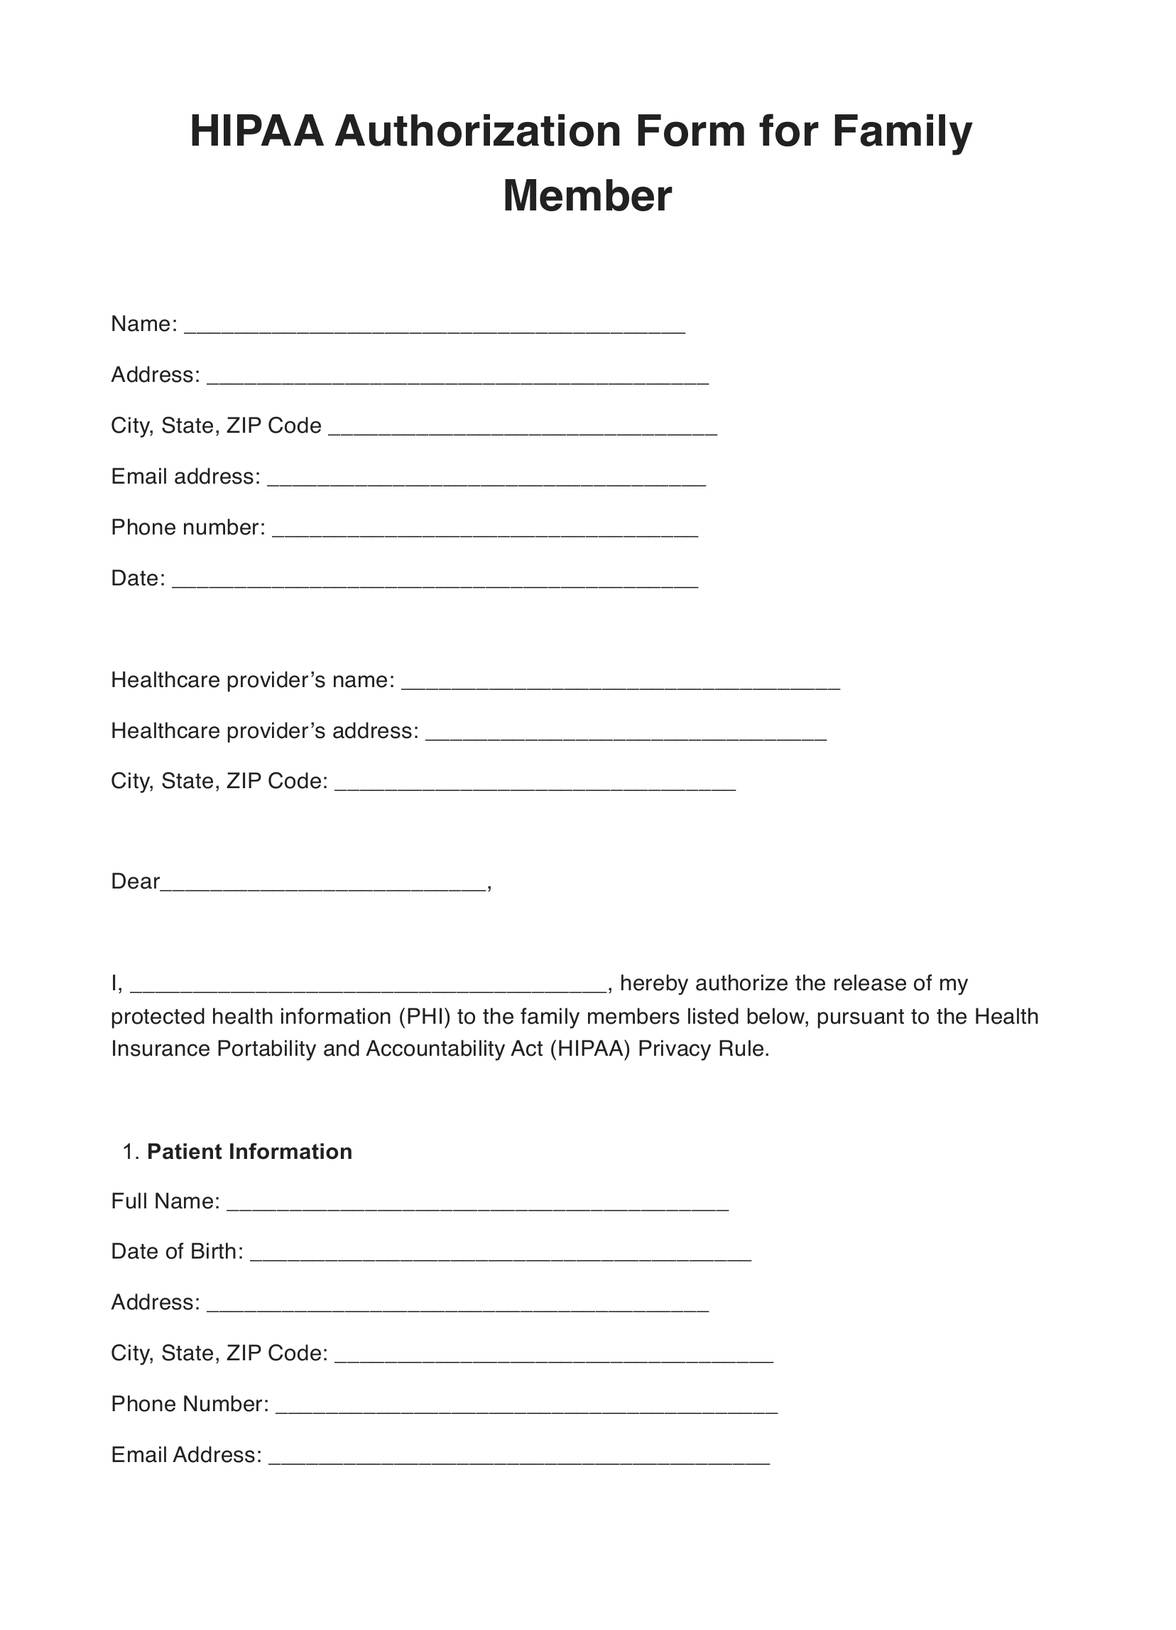 HIPAA Authorization Form For Family Members PDF Example